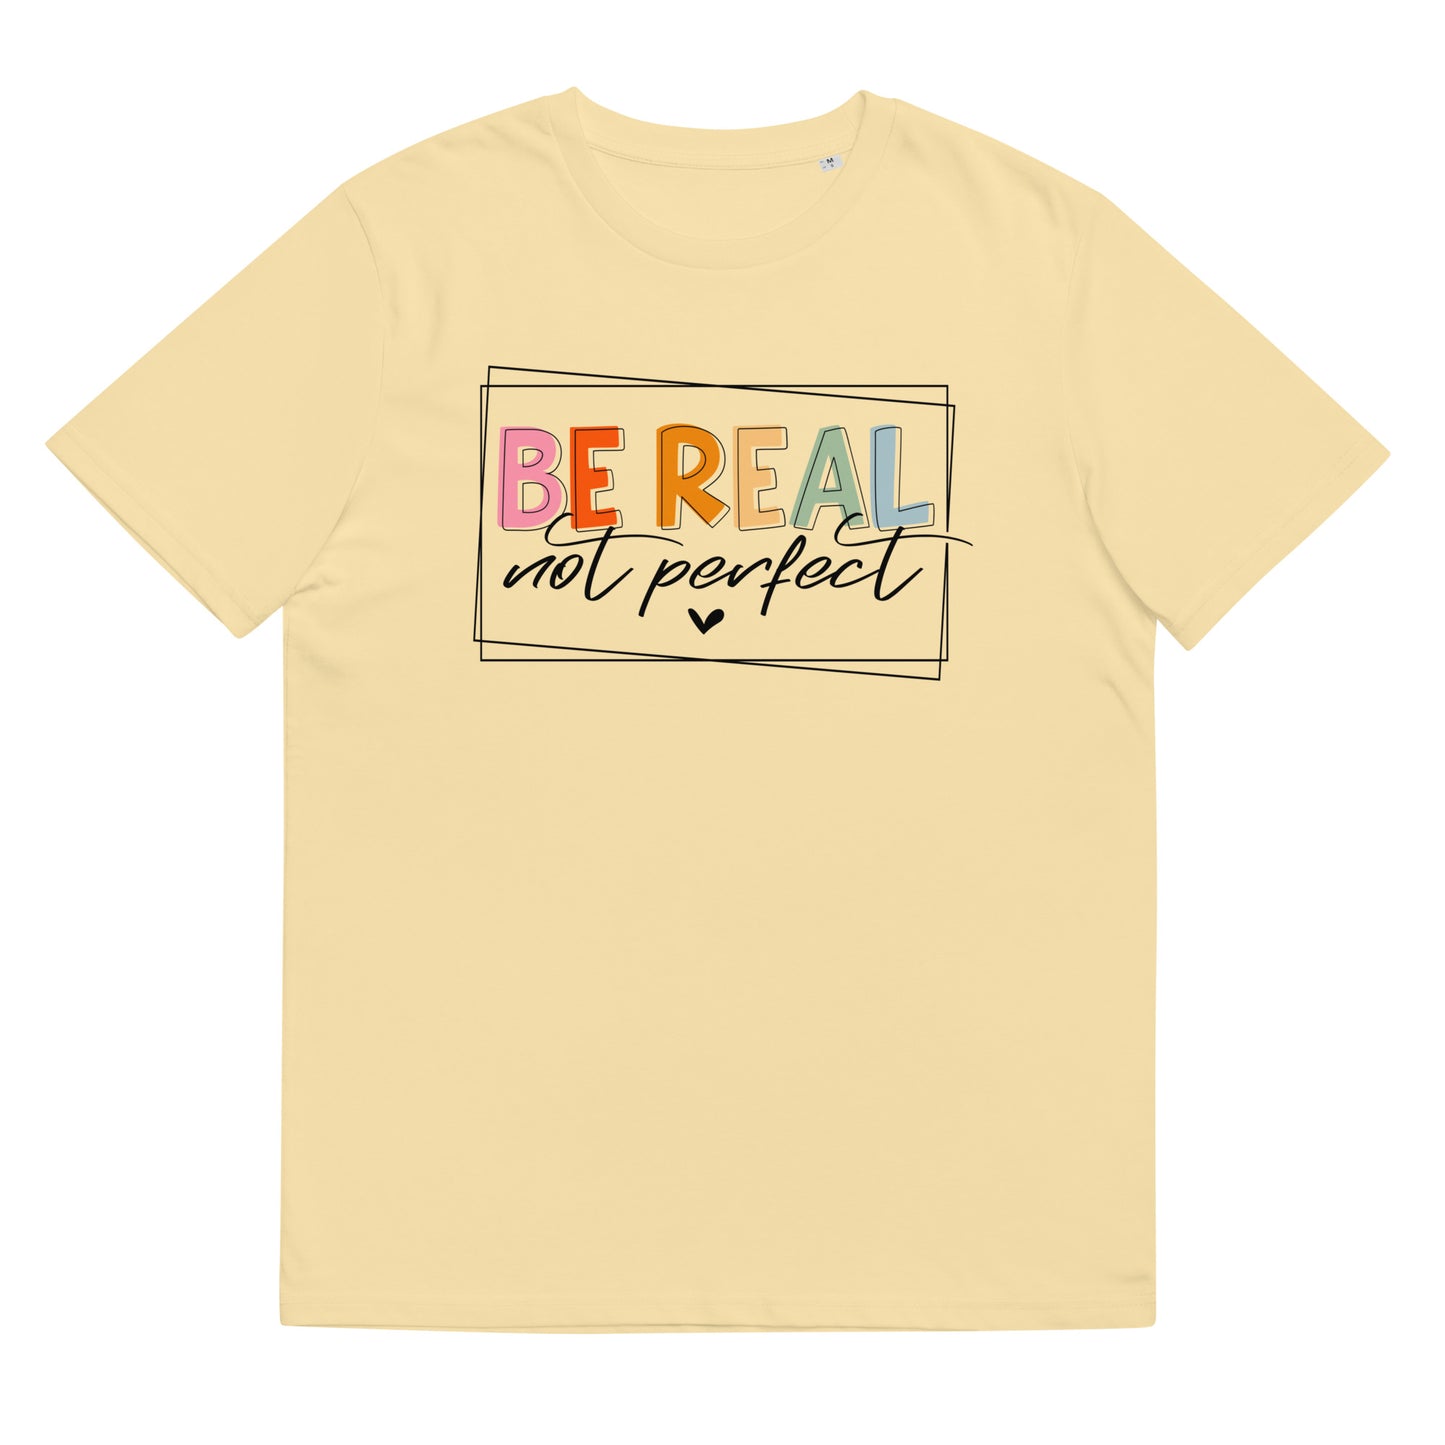 Organic cotton unisex t-shirt: "Be real, not perfect"